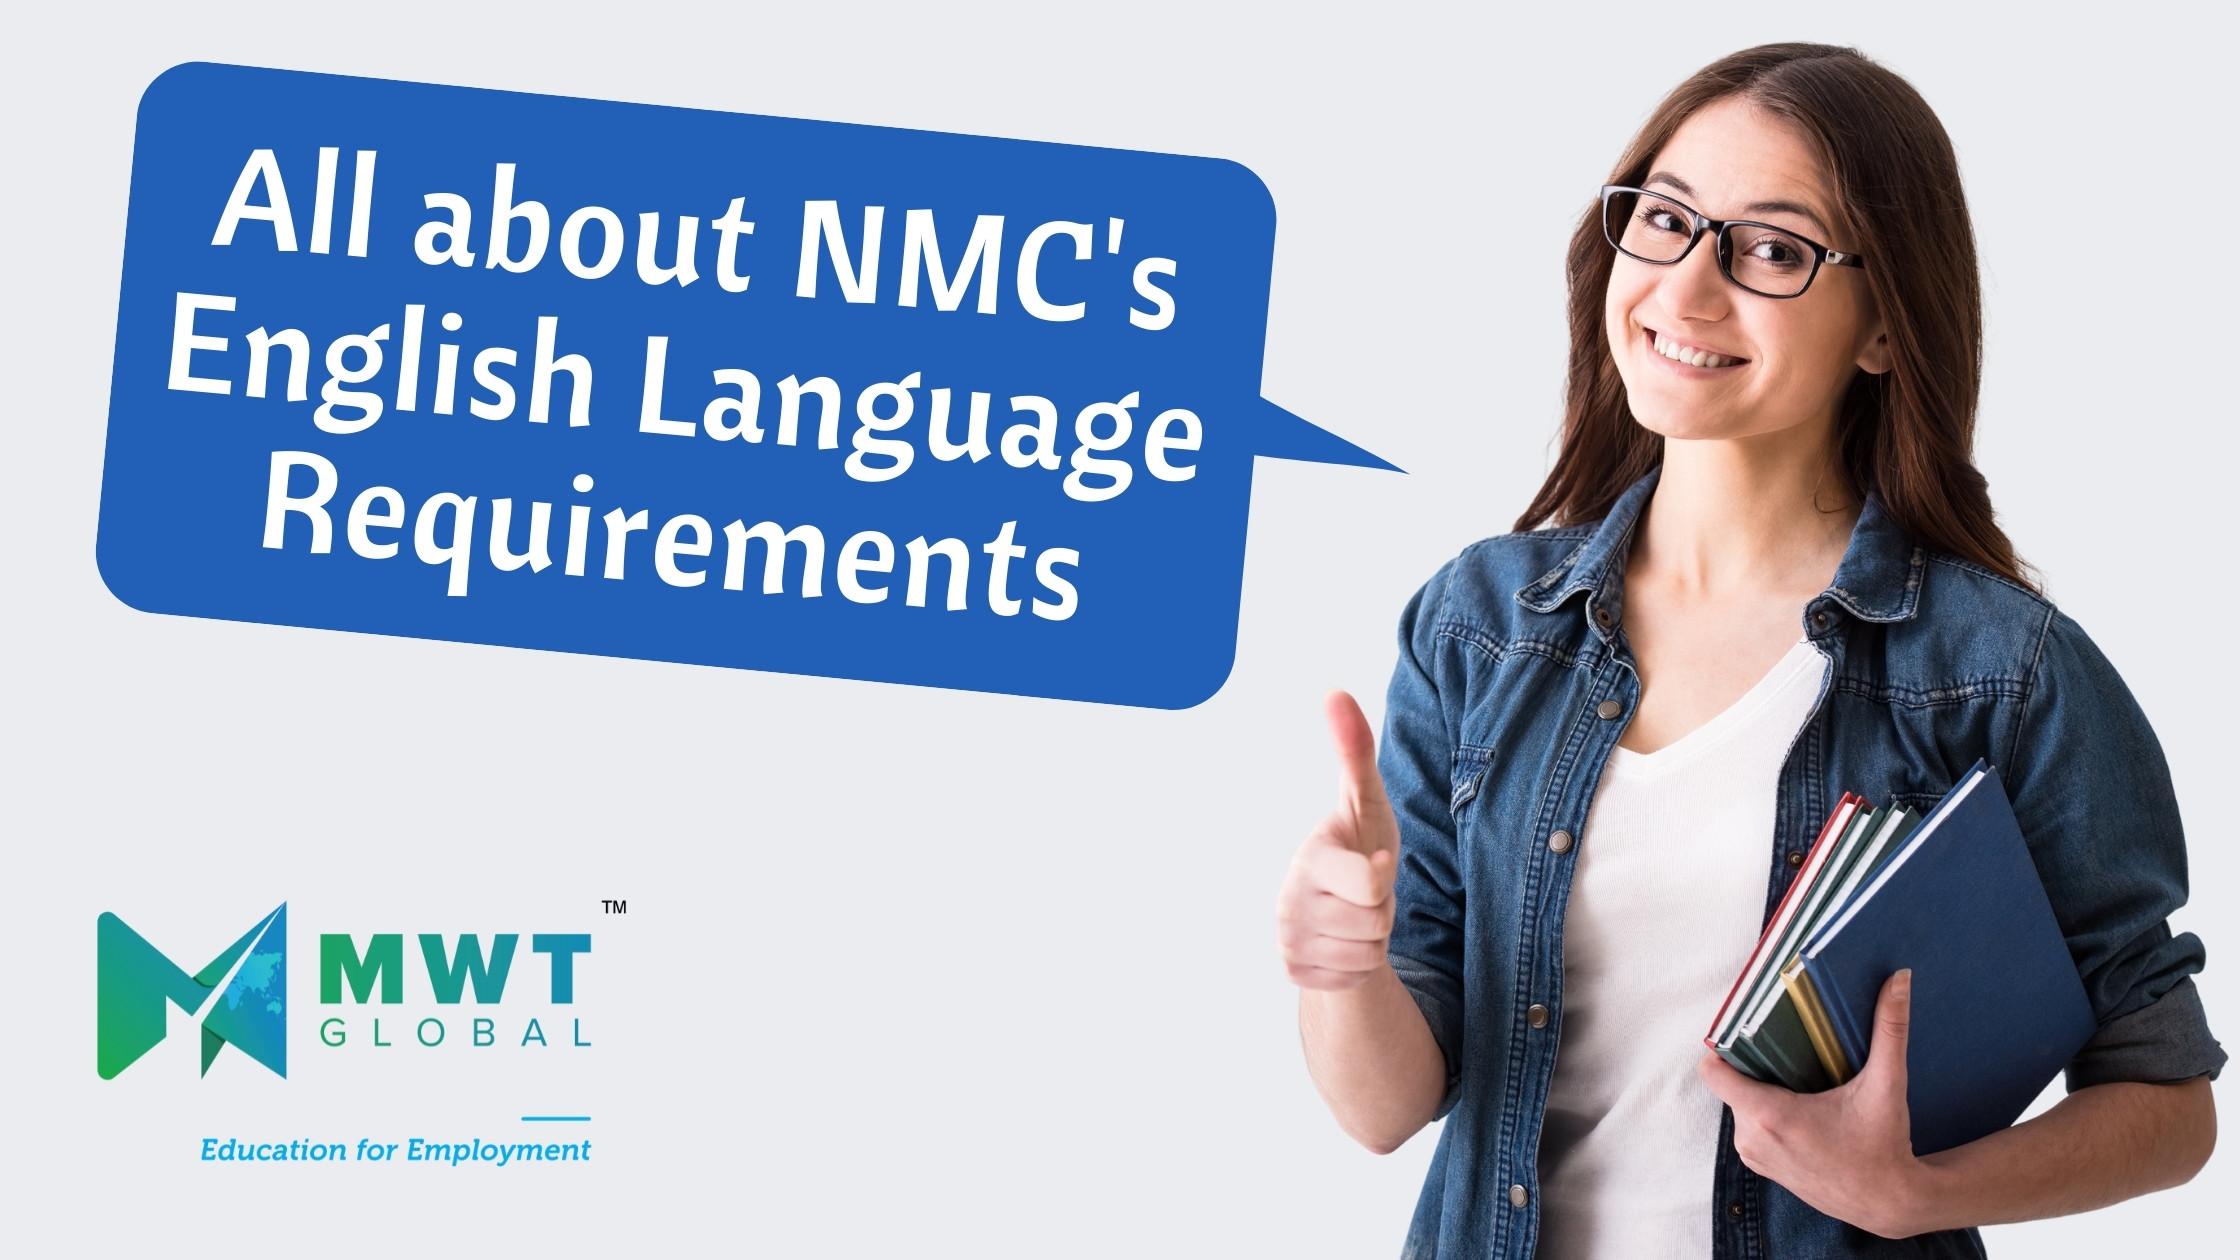 All about NMC’s English Language Requirements